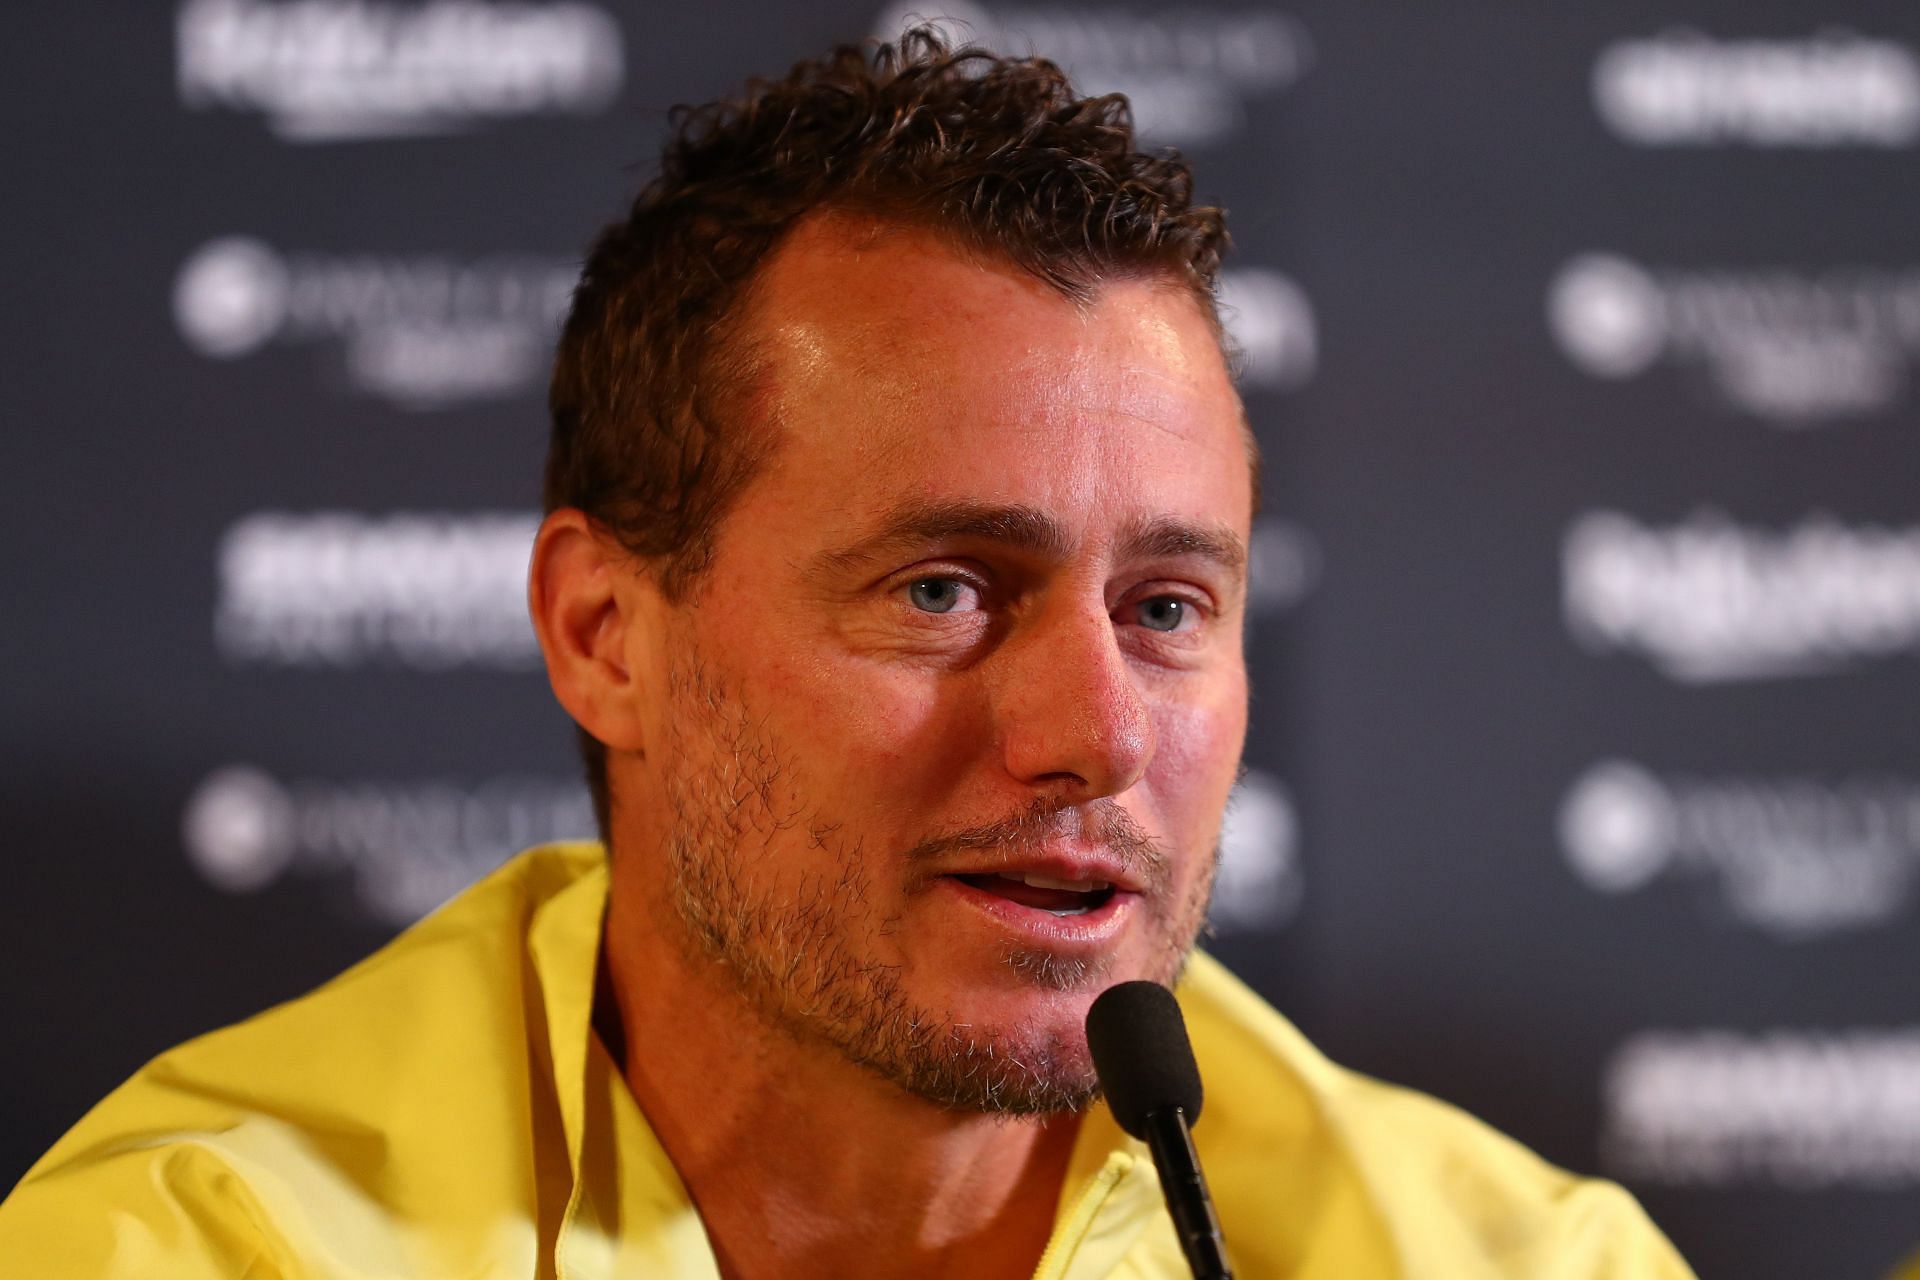 Lleyton Hewitt in a press conference